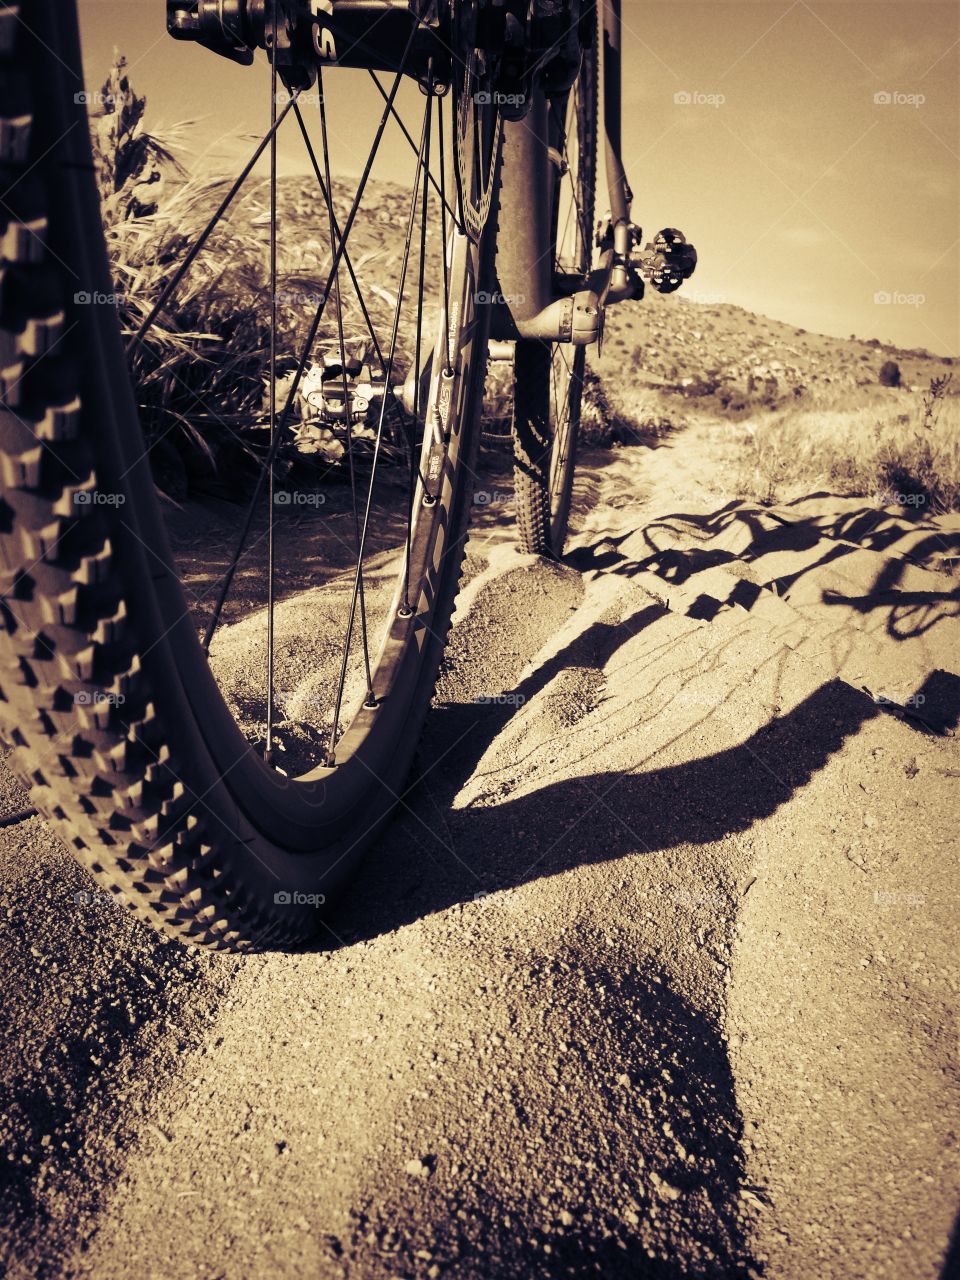 Just keep pedaling . A little sand makes for fun riding! 